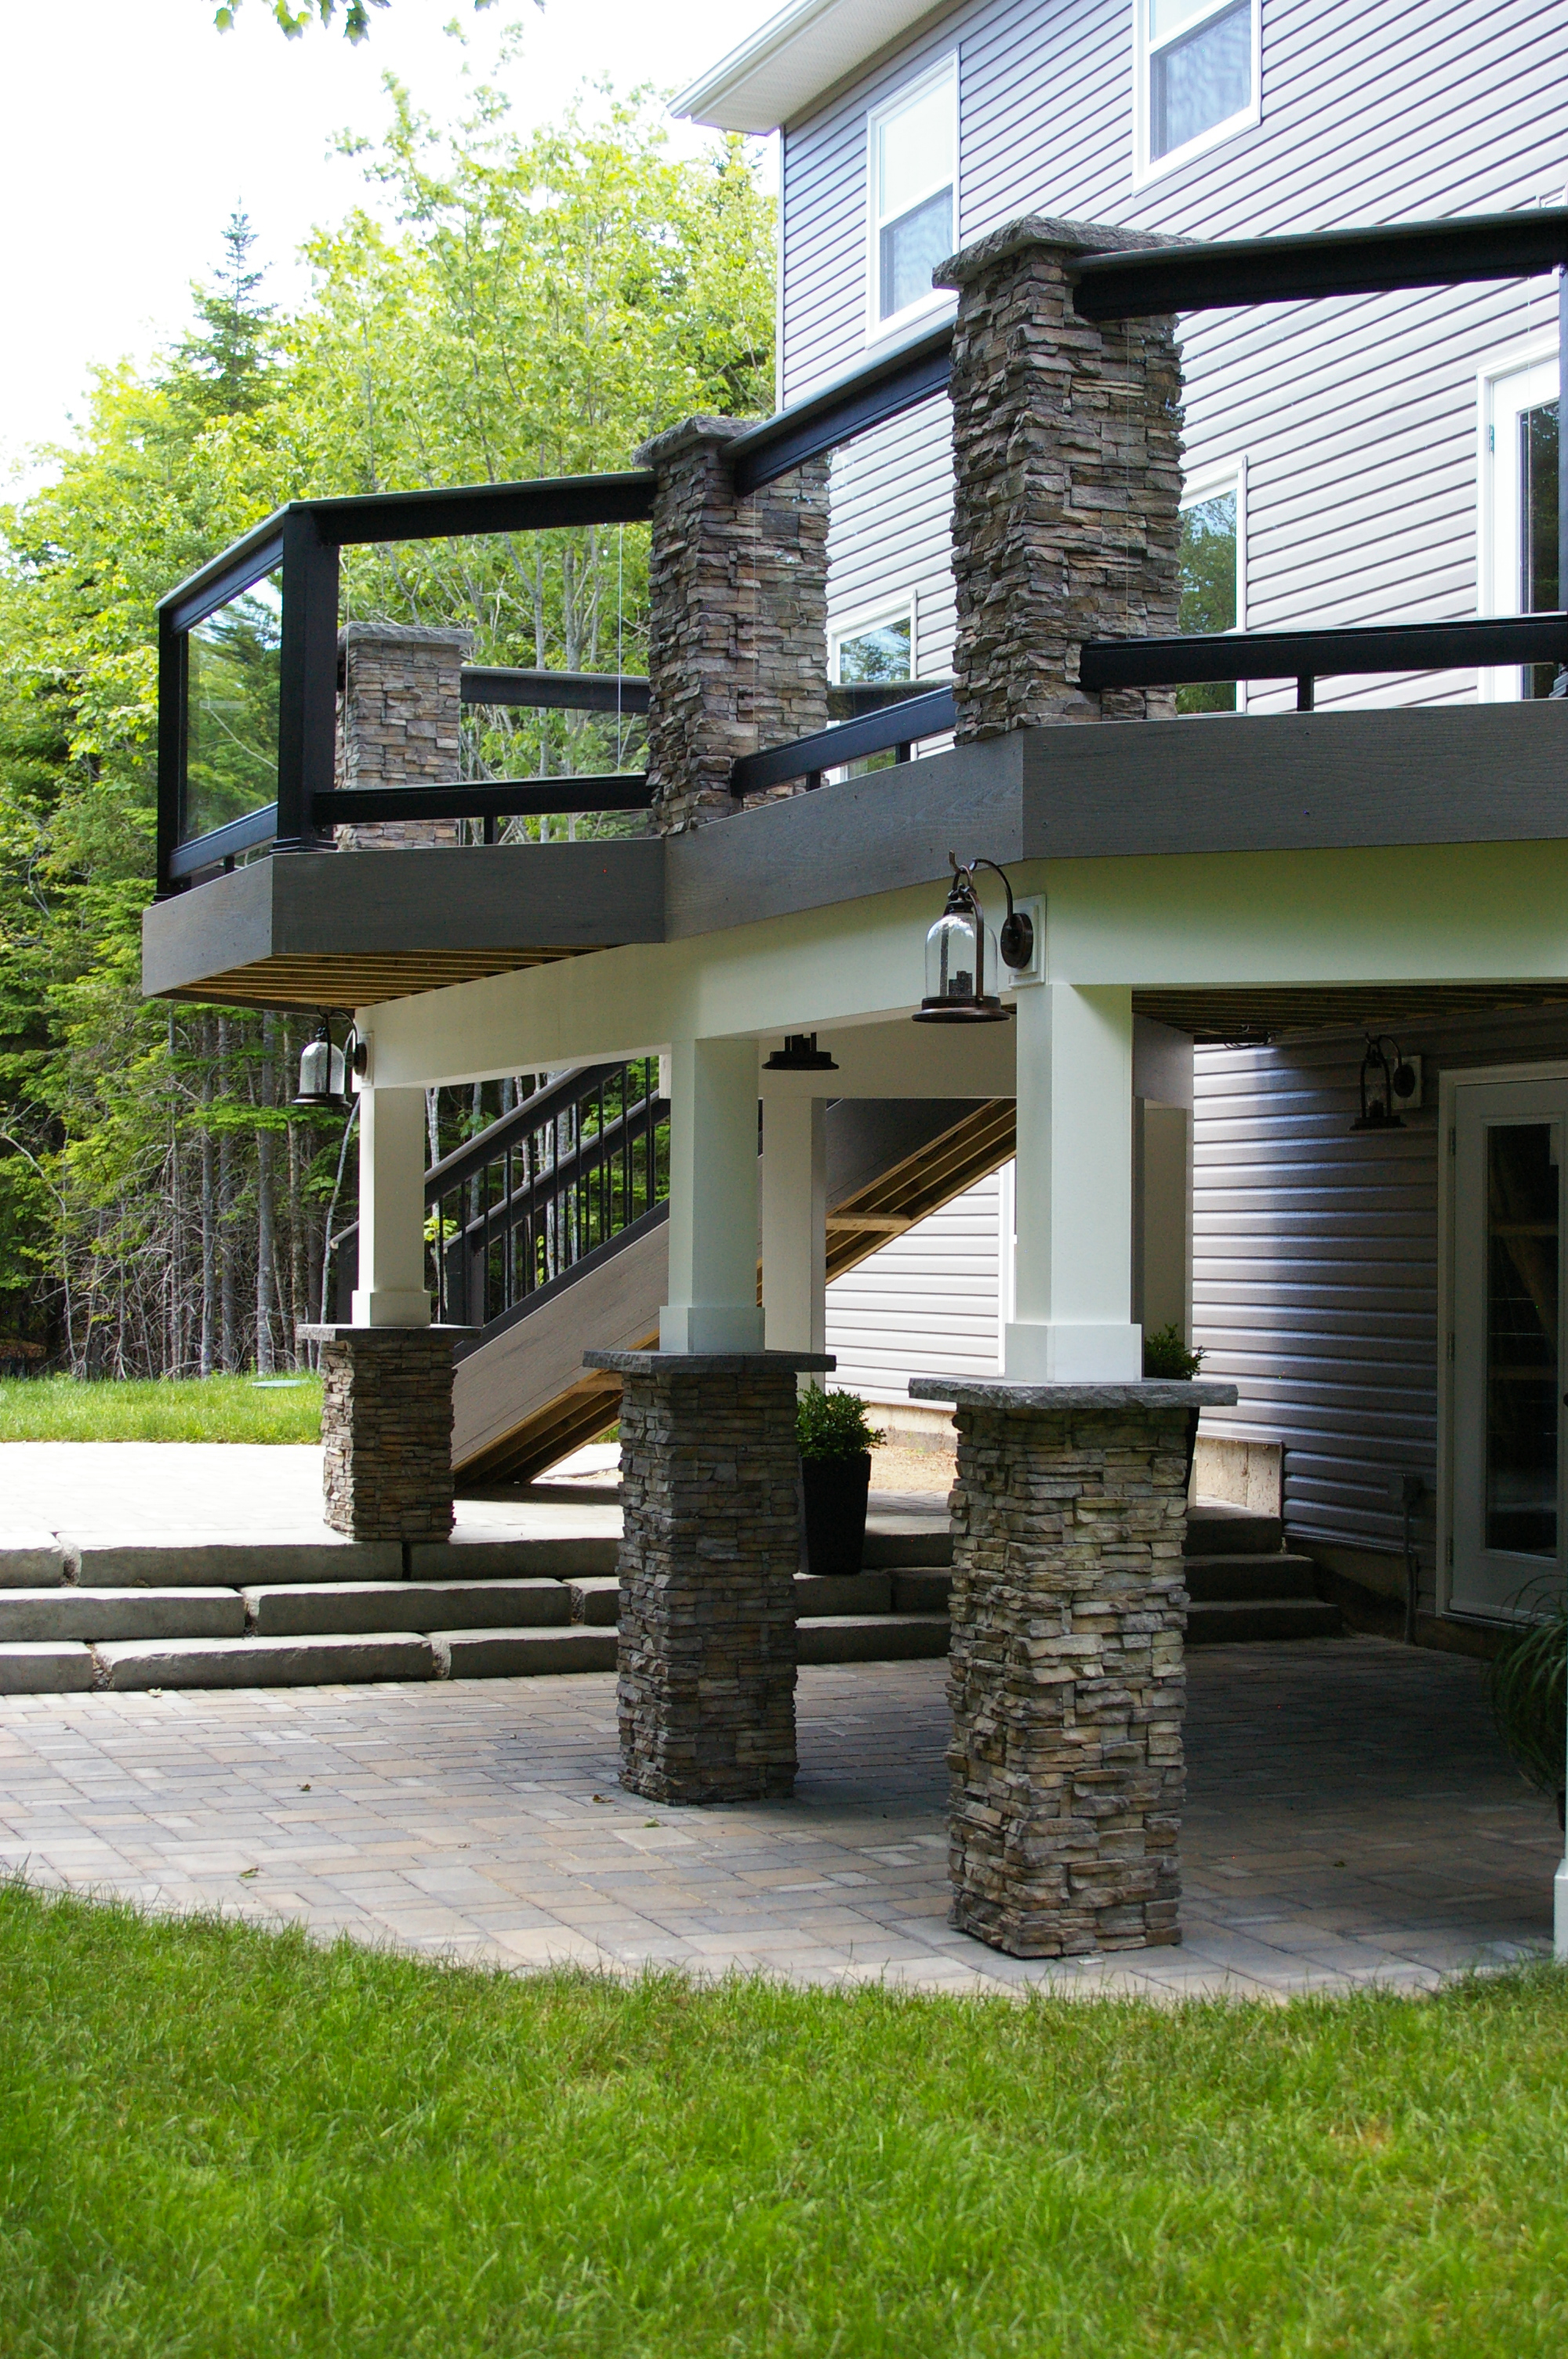 Archadeck of Nova Scotia’s award-winning deck project is an exquisite multi-level entertainment area. Below the renovated deck is a new curved Trevista paver patio. Stone steps leading from the shaded area below the deck to the exposed patio area by the deck’s stairs allow the homeowners to lounge in the shade or sunshine. 
